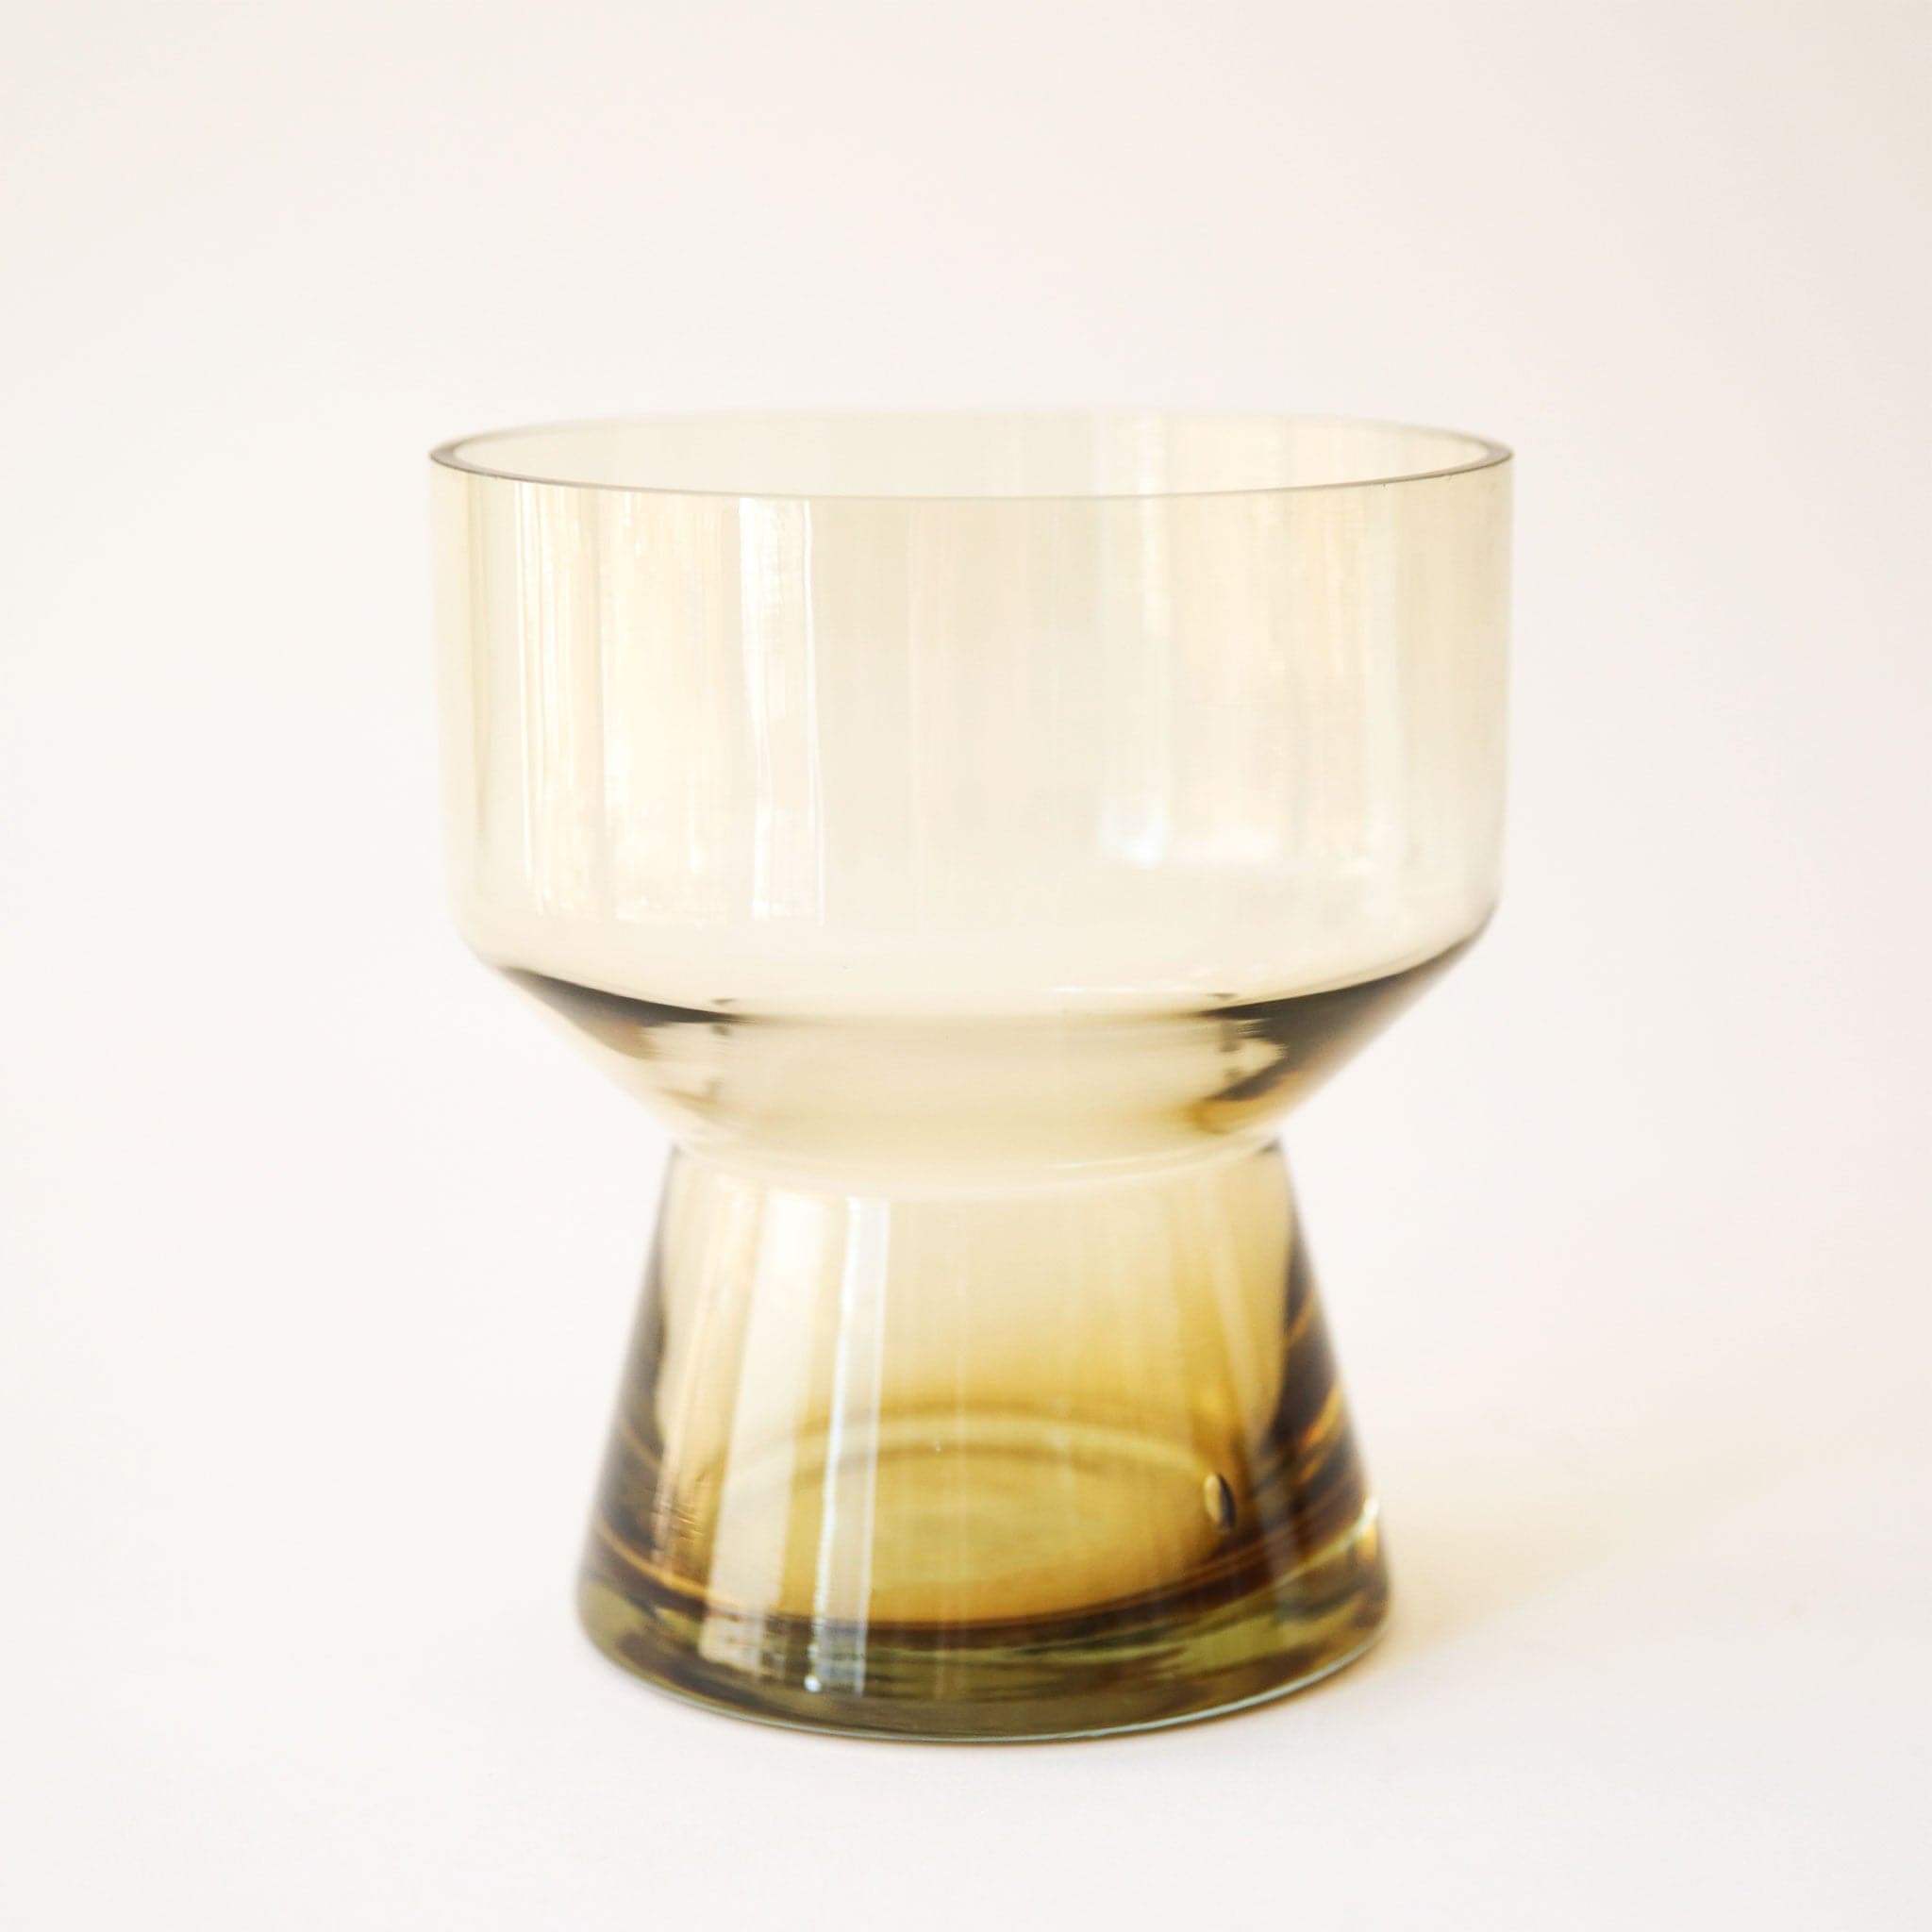 A compote style glass vase in an amber color in front of a white ground.